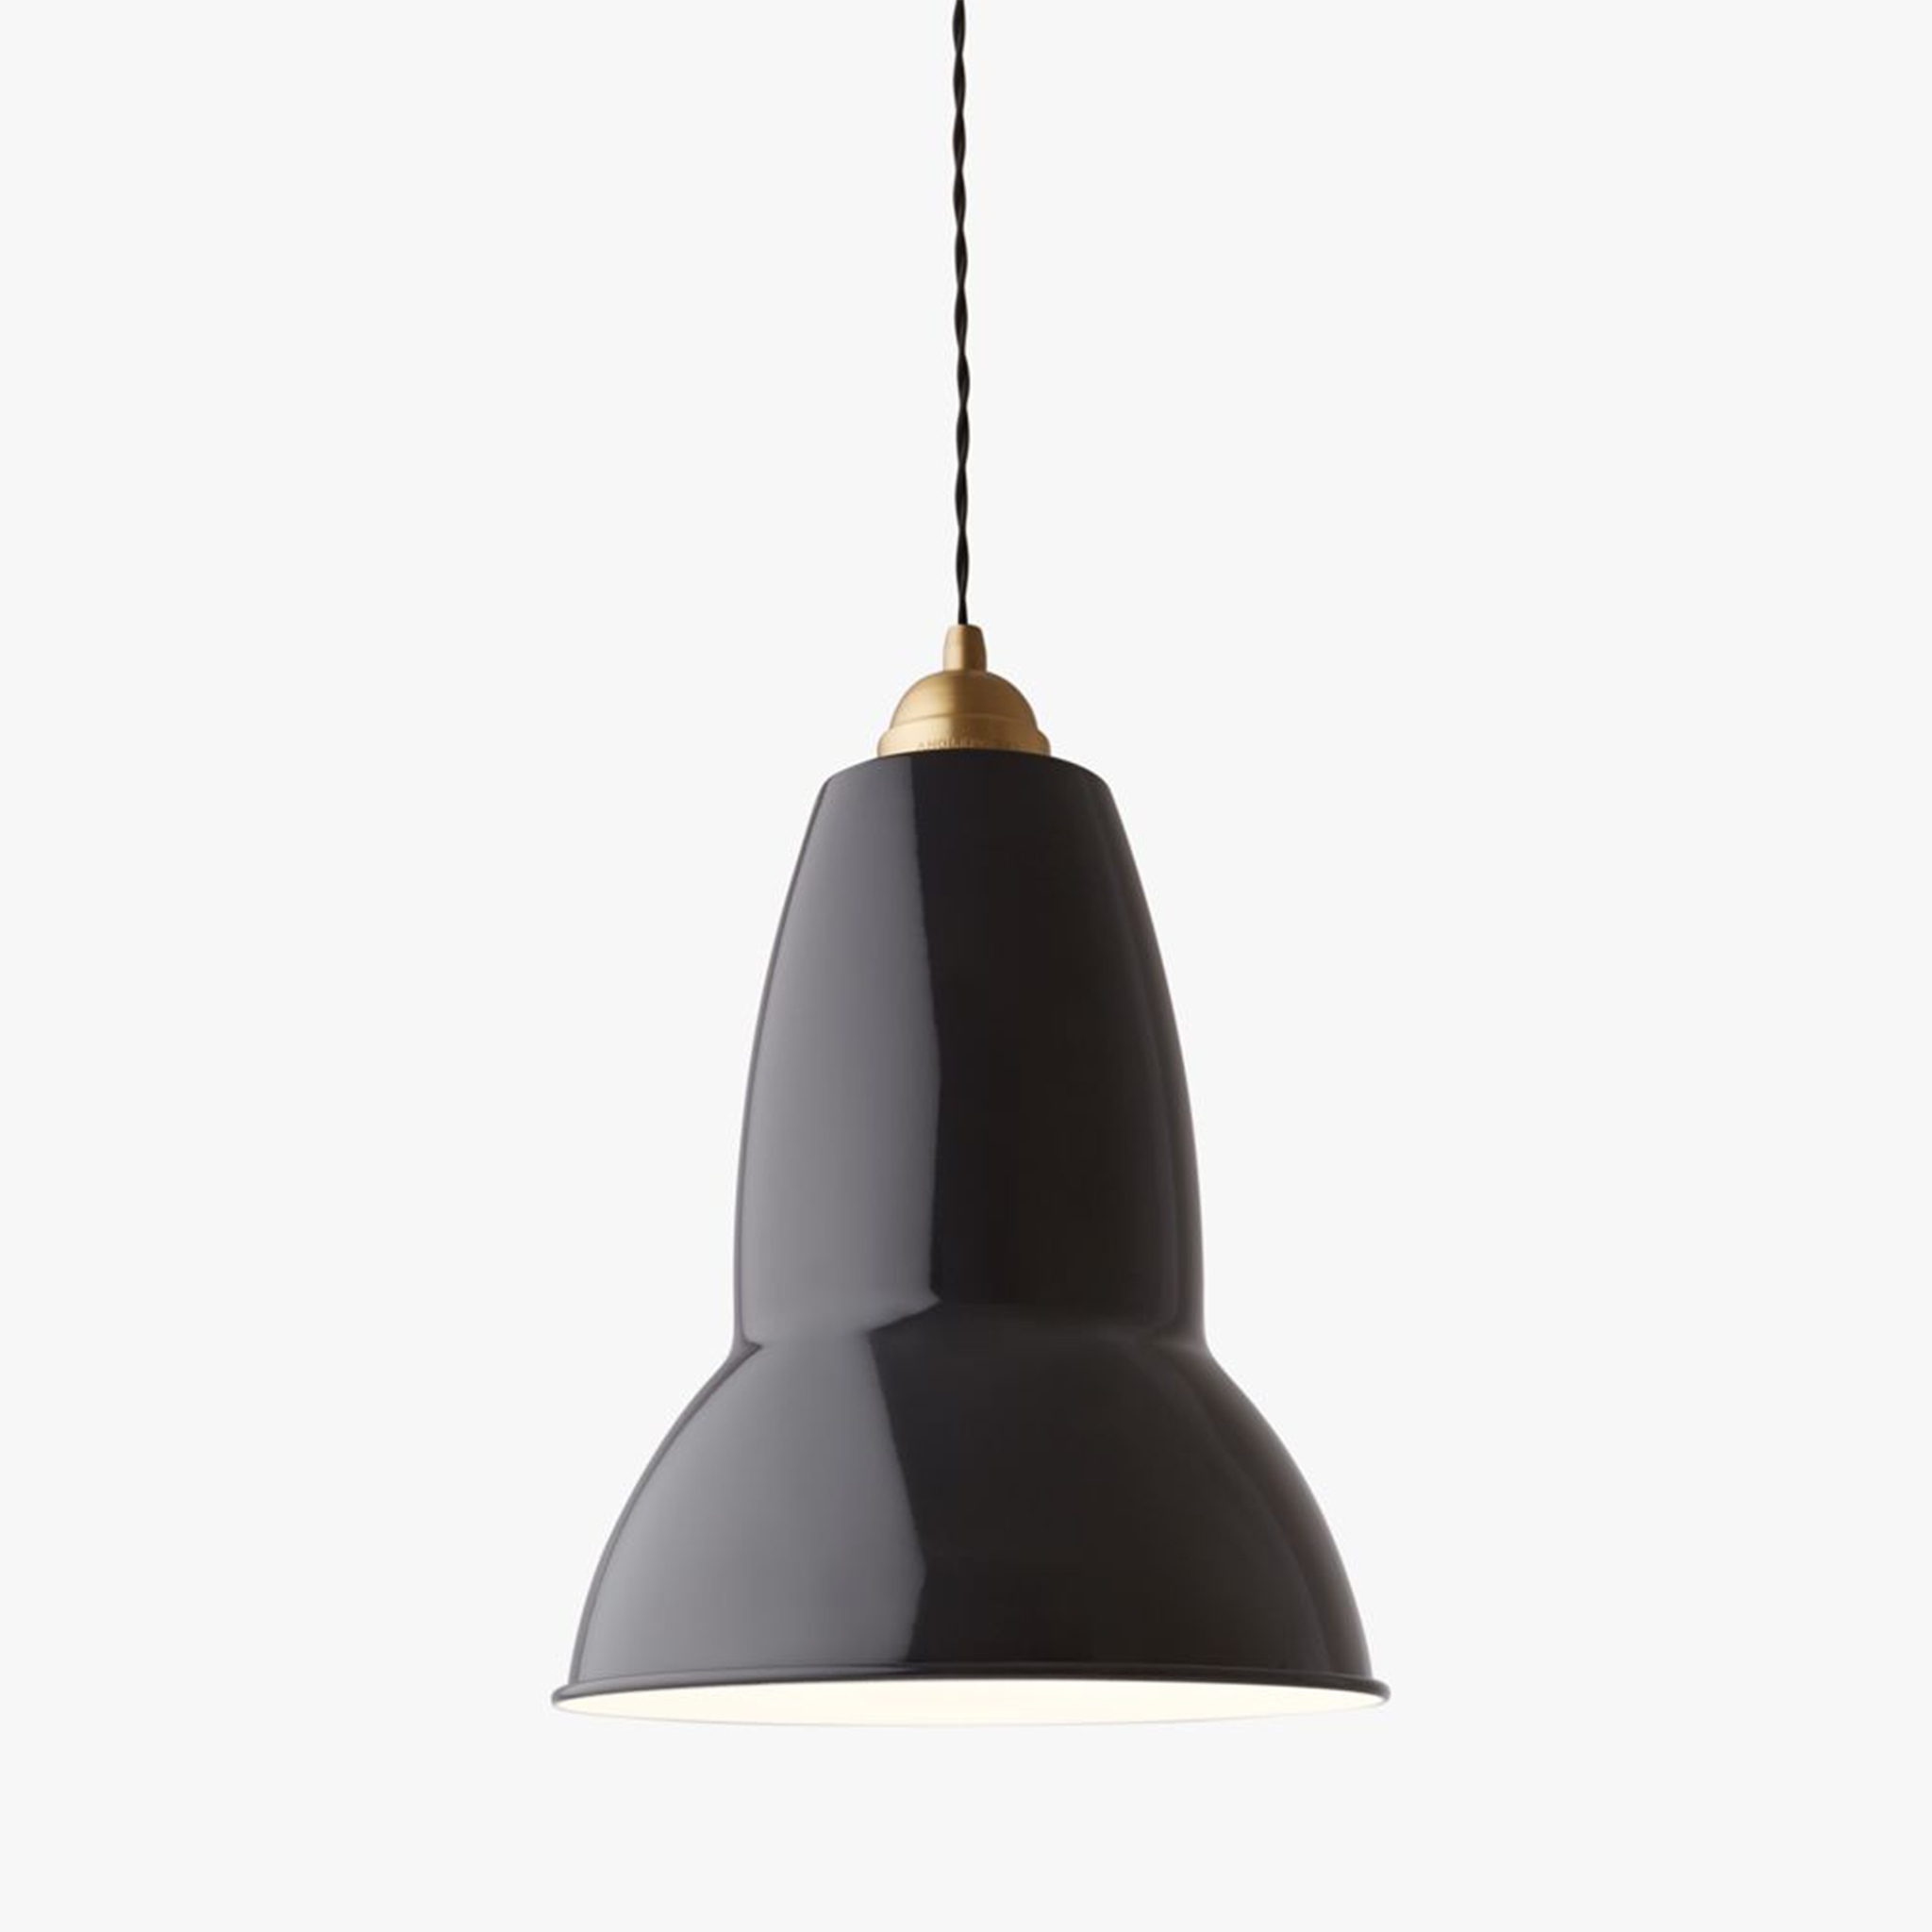 Original 1227 Brass Maxi Pendant by Anglepoise